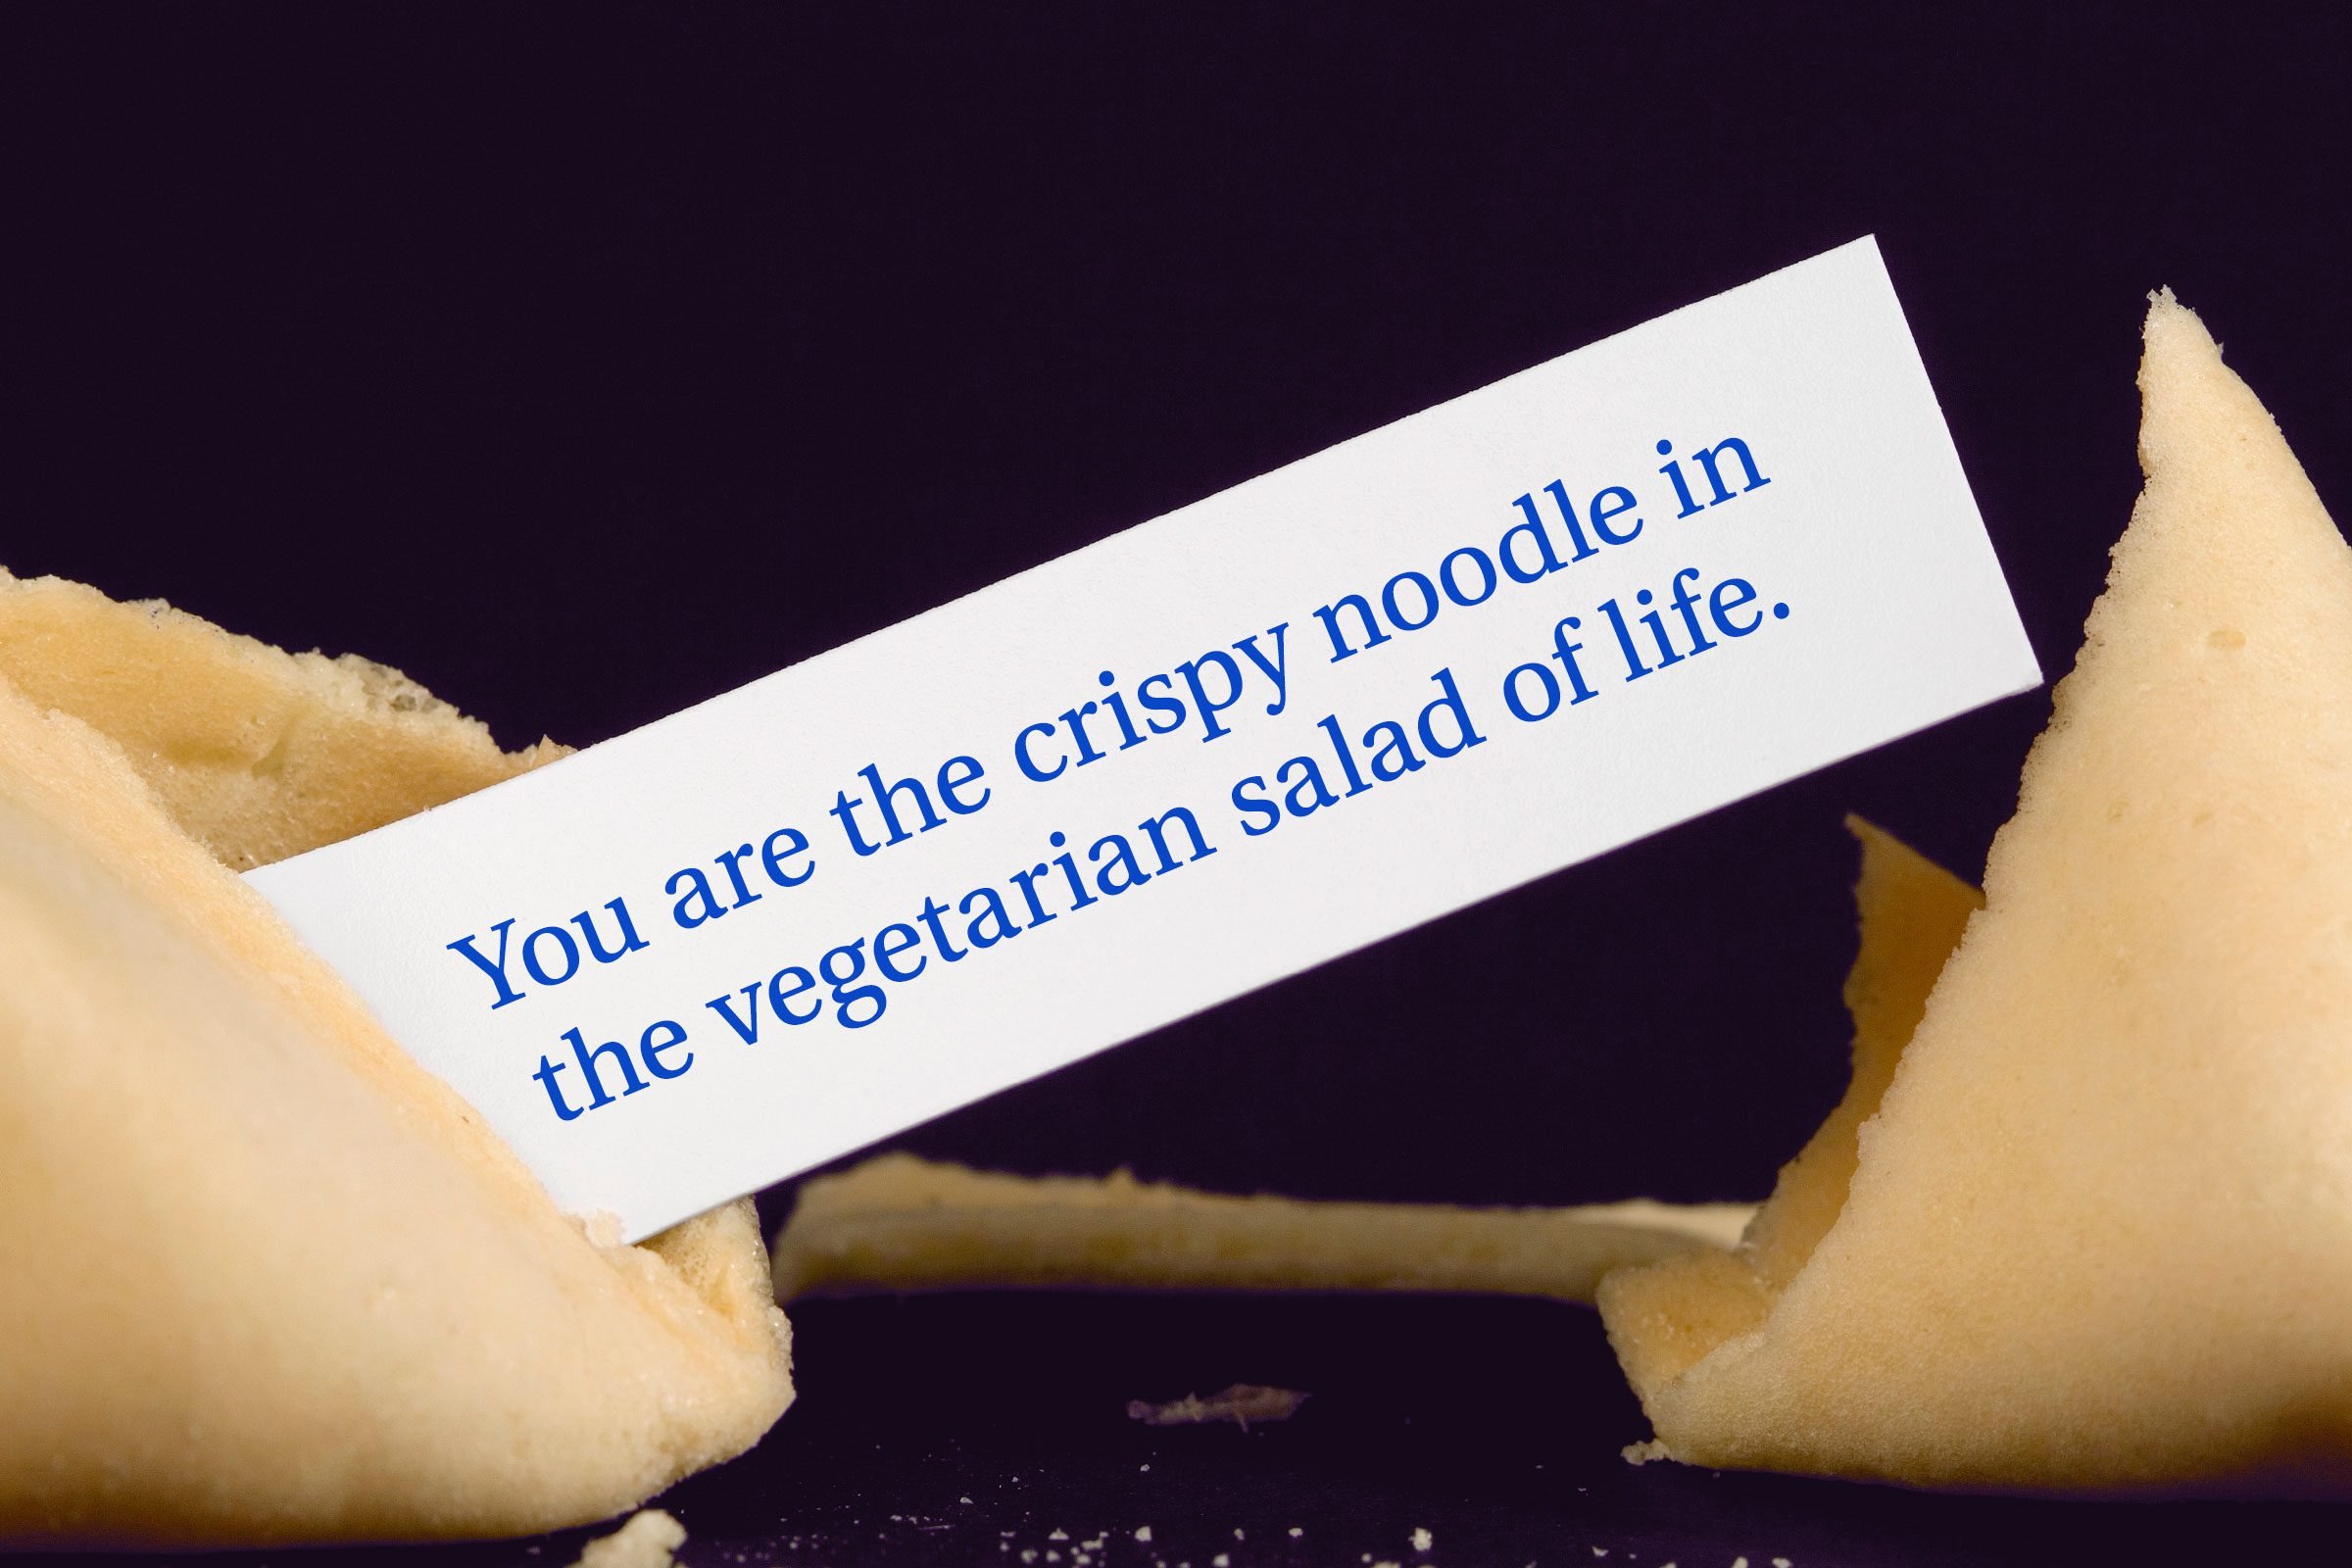 For image: You are the crispy noodle in the vegetarian salad of life.